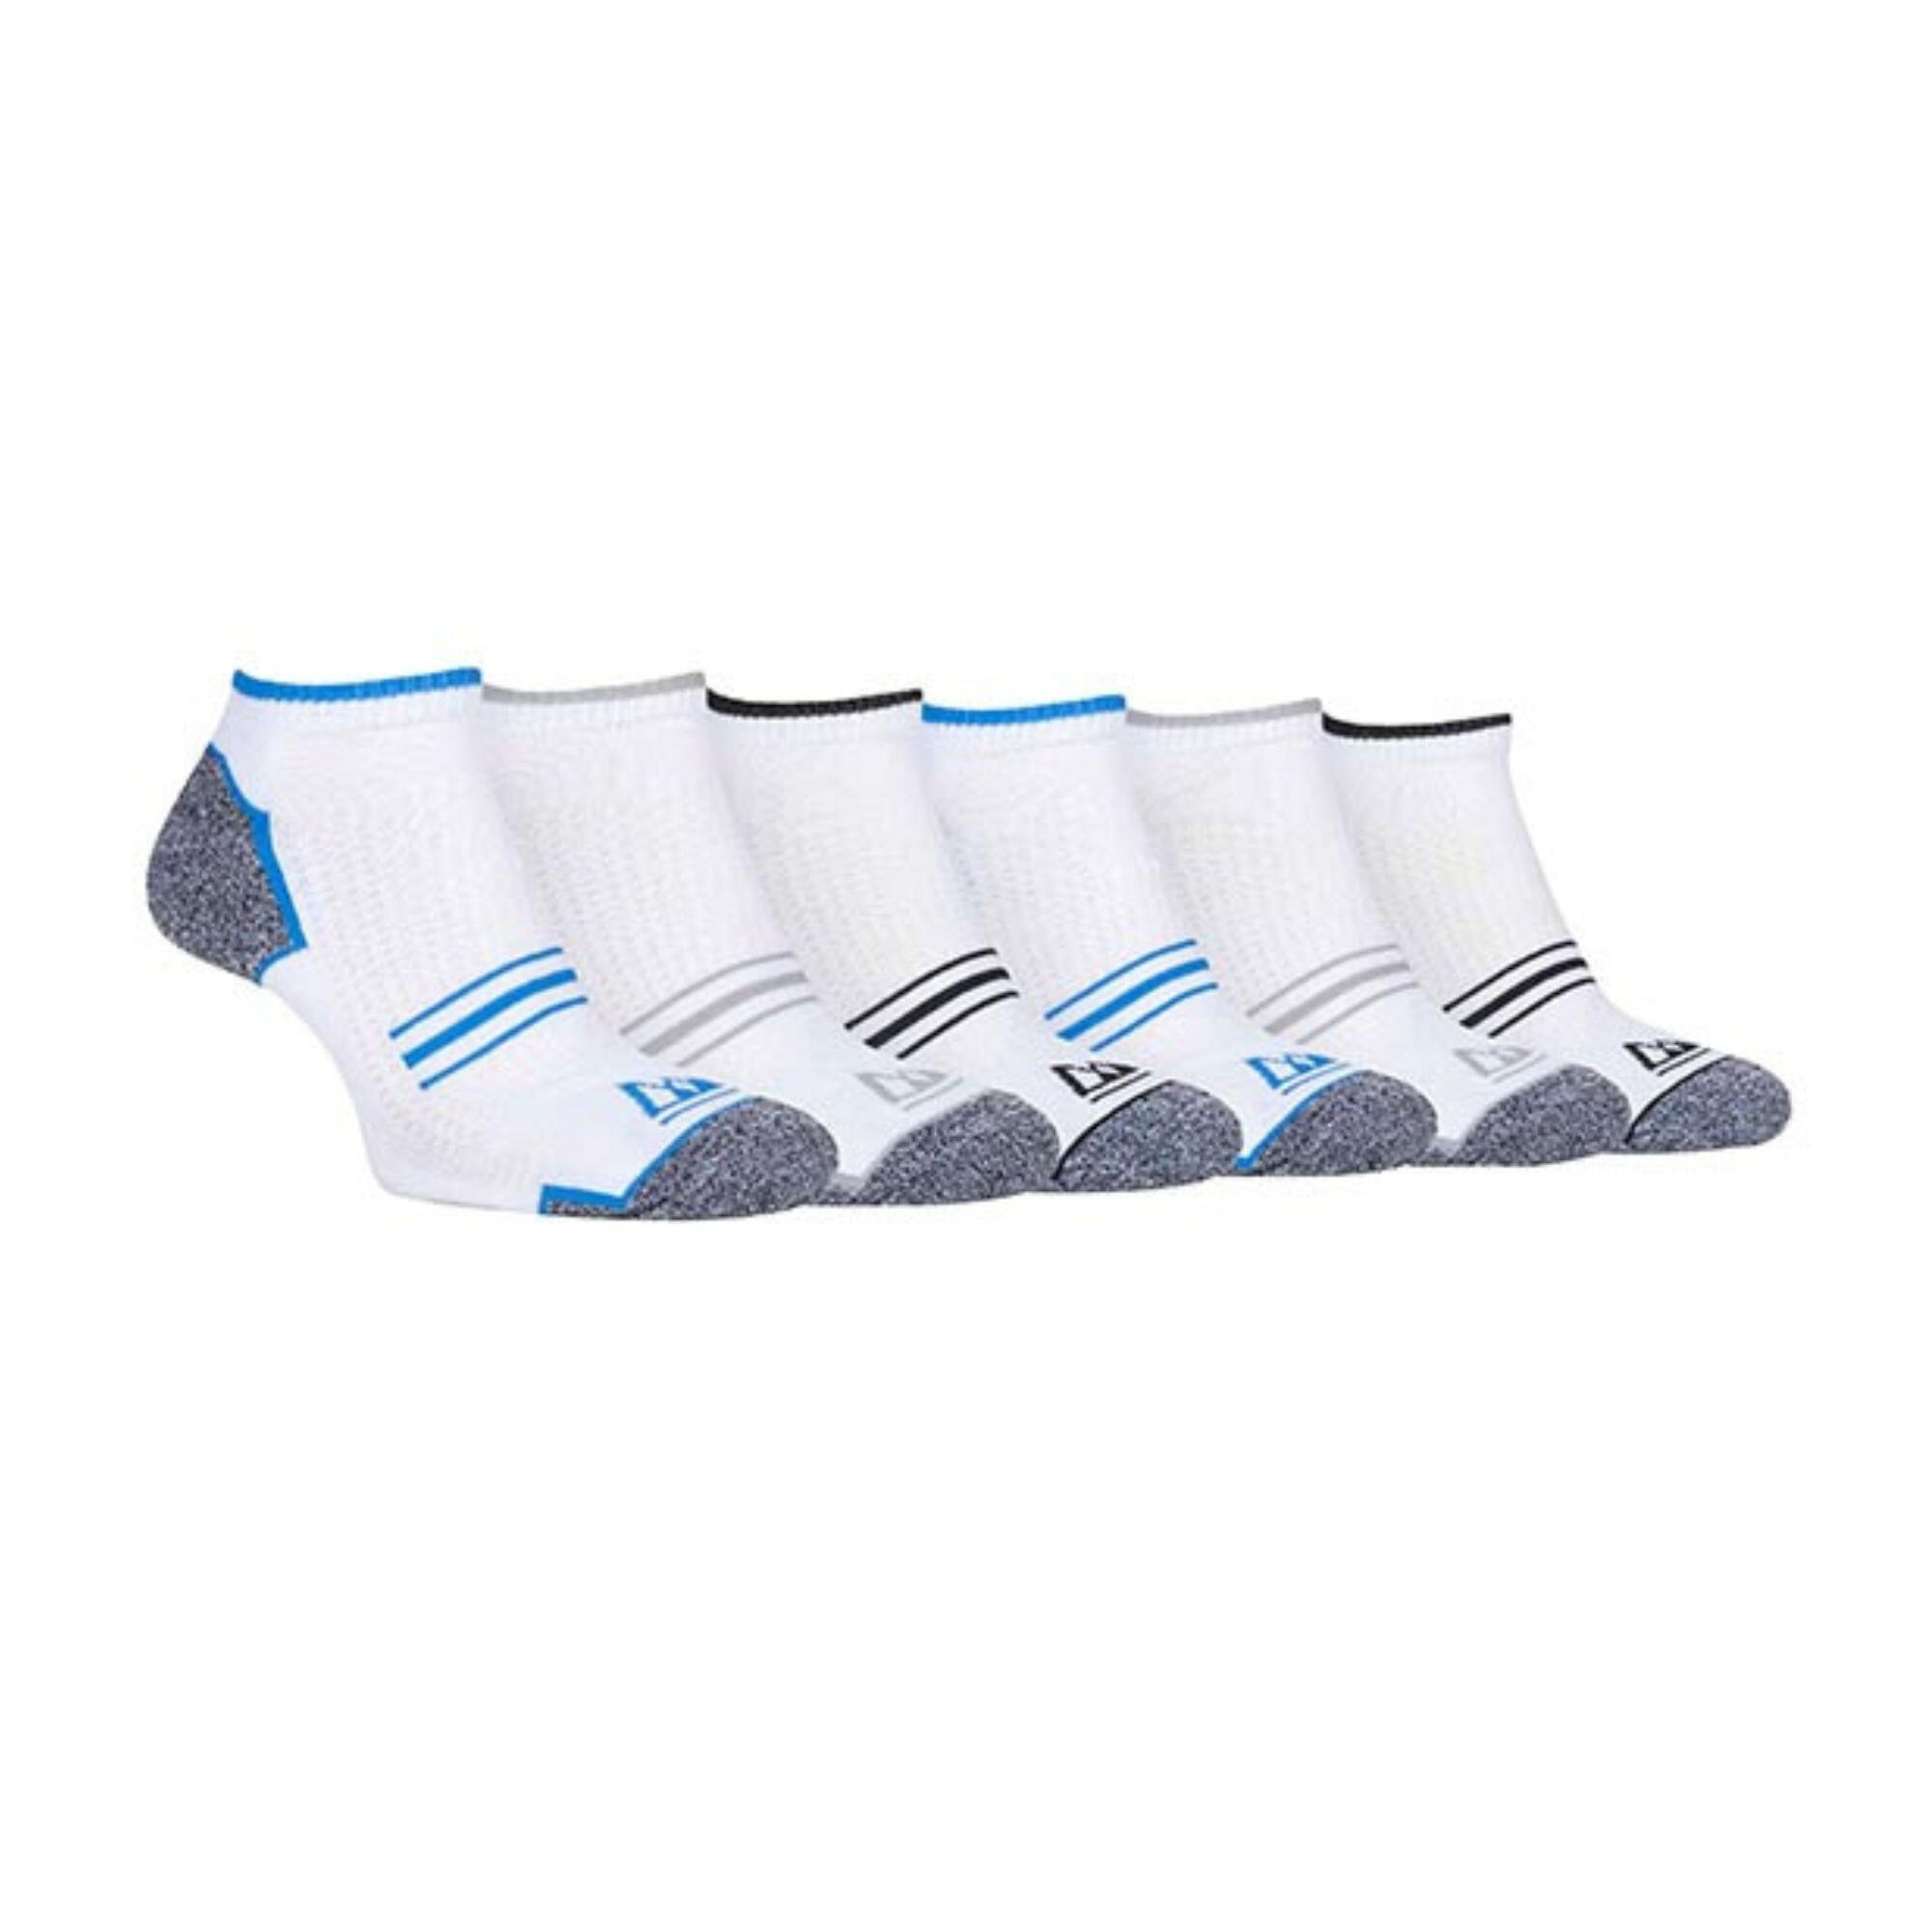 STORM BLOC 6 Pairs Mens Breathable Cushioned Sole Running Low Cut Trainer Socks